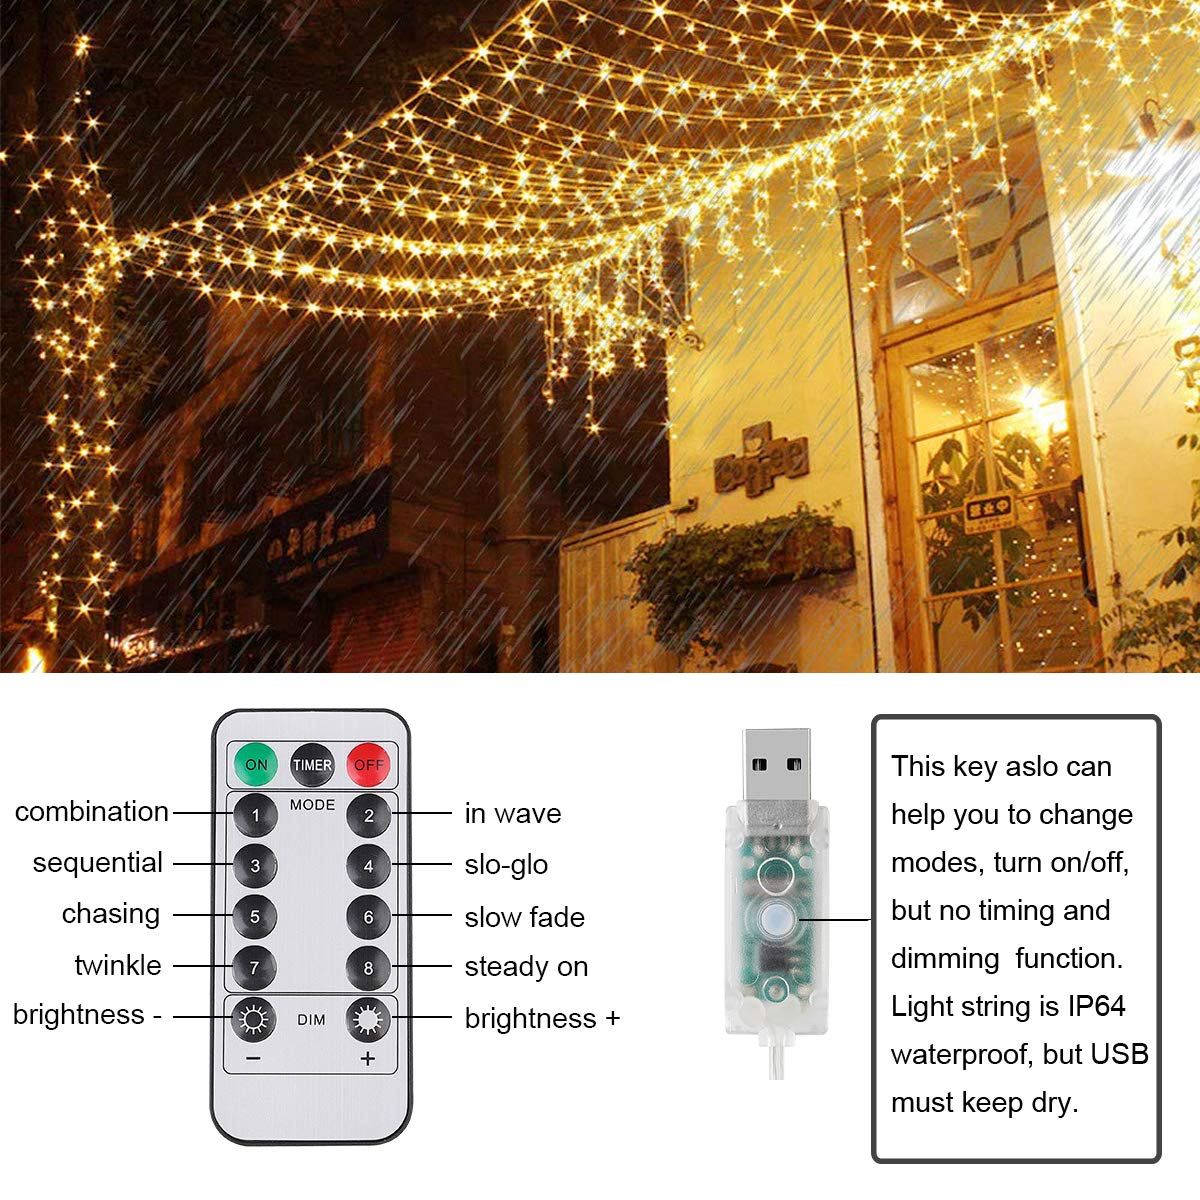 SUPERNIGHT LED Curtain Lights, Newest Window Curtain Twinkle Lights Warm White for Bedroom, Wedding, Parties, Christmas and Decorations (9.8 x 9.8 ft, 300LEDs, 8 Modes)